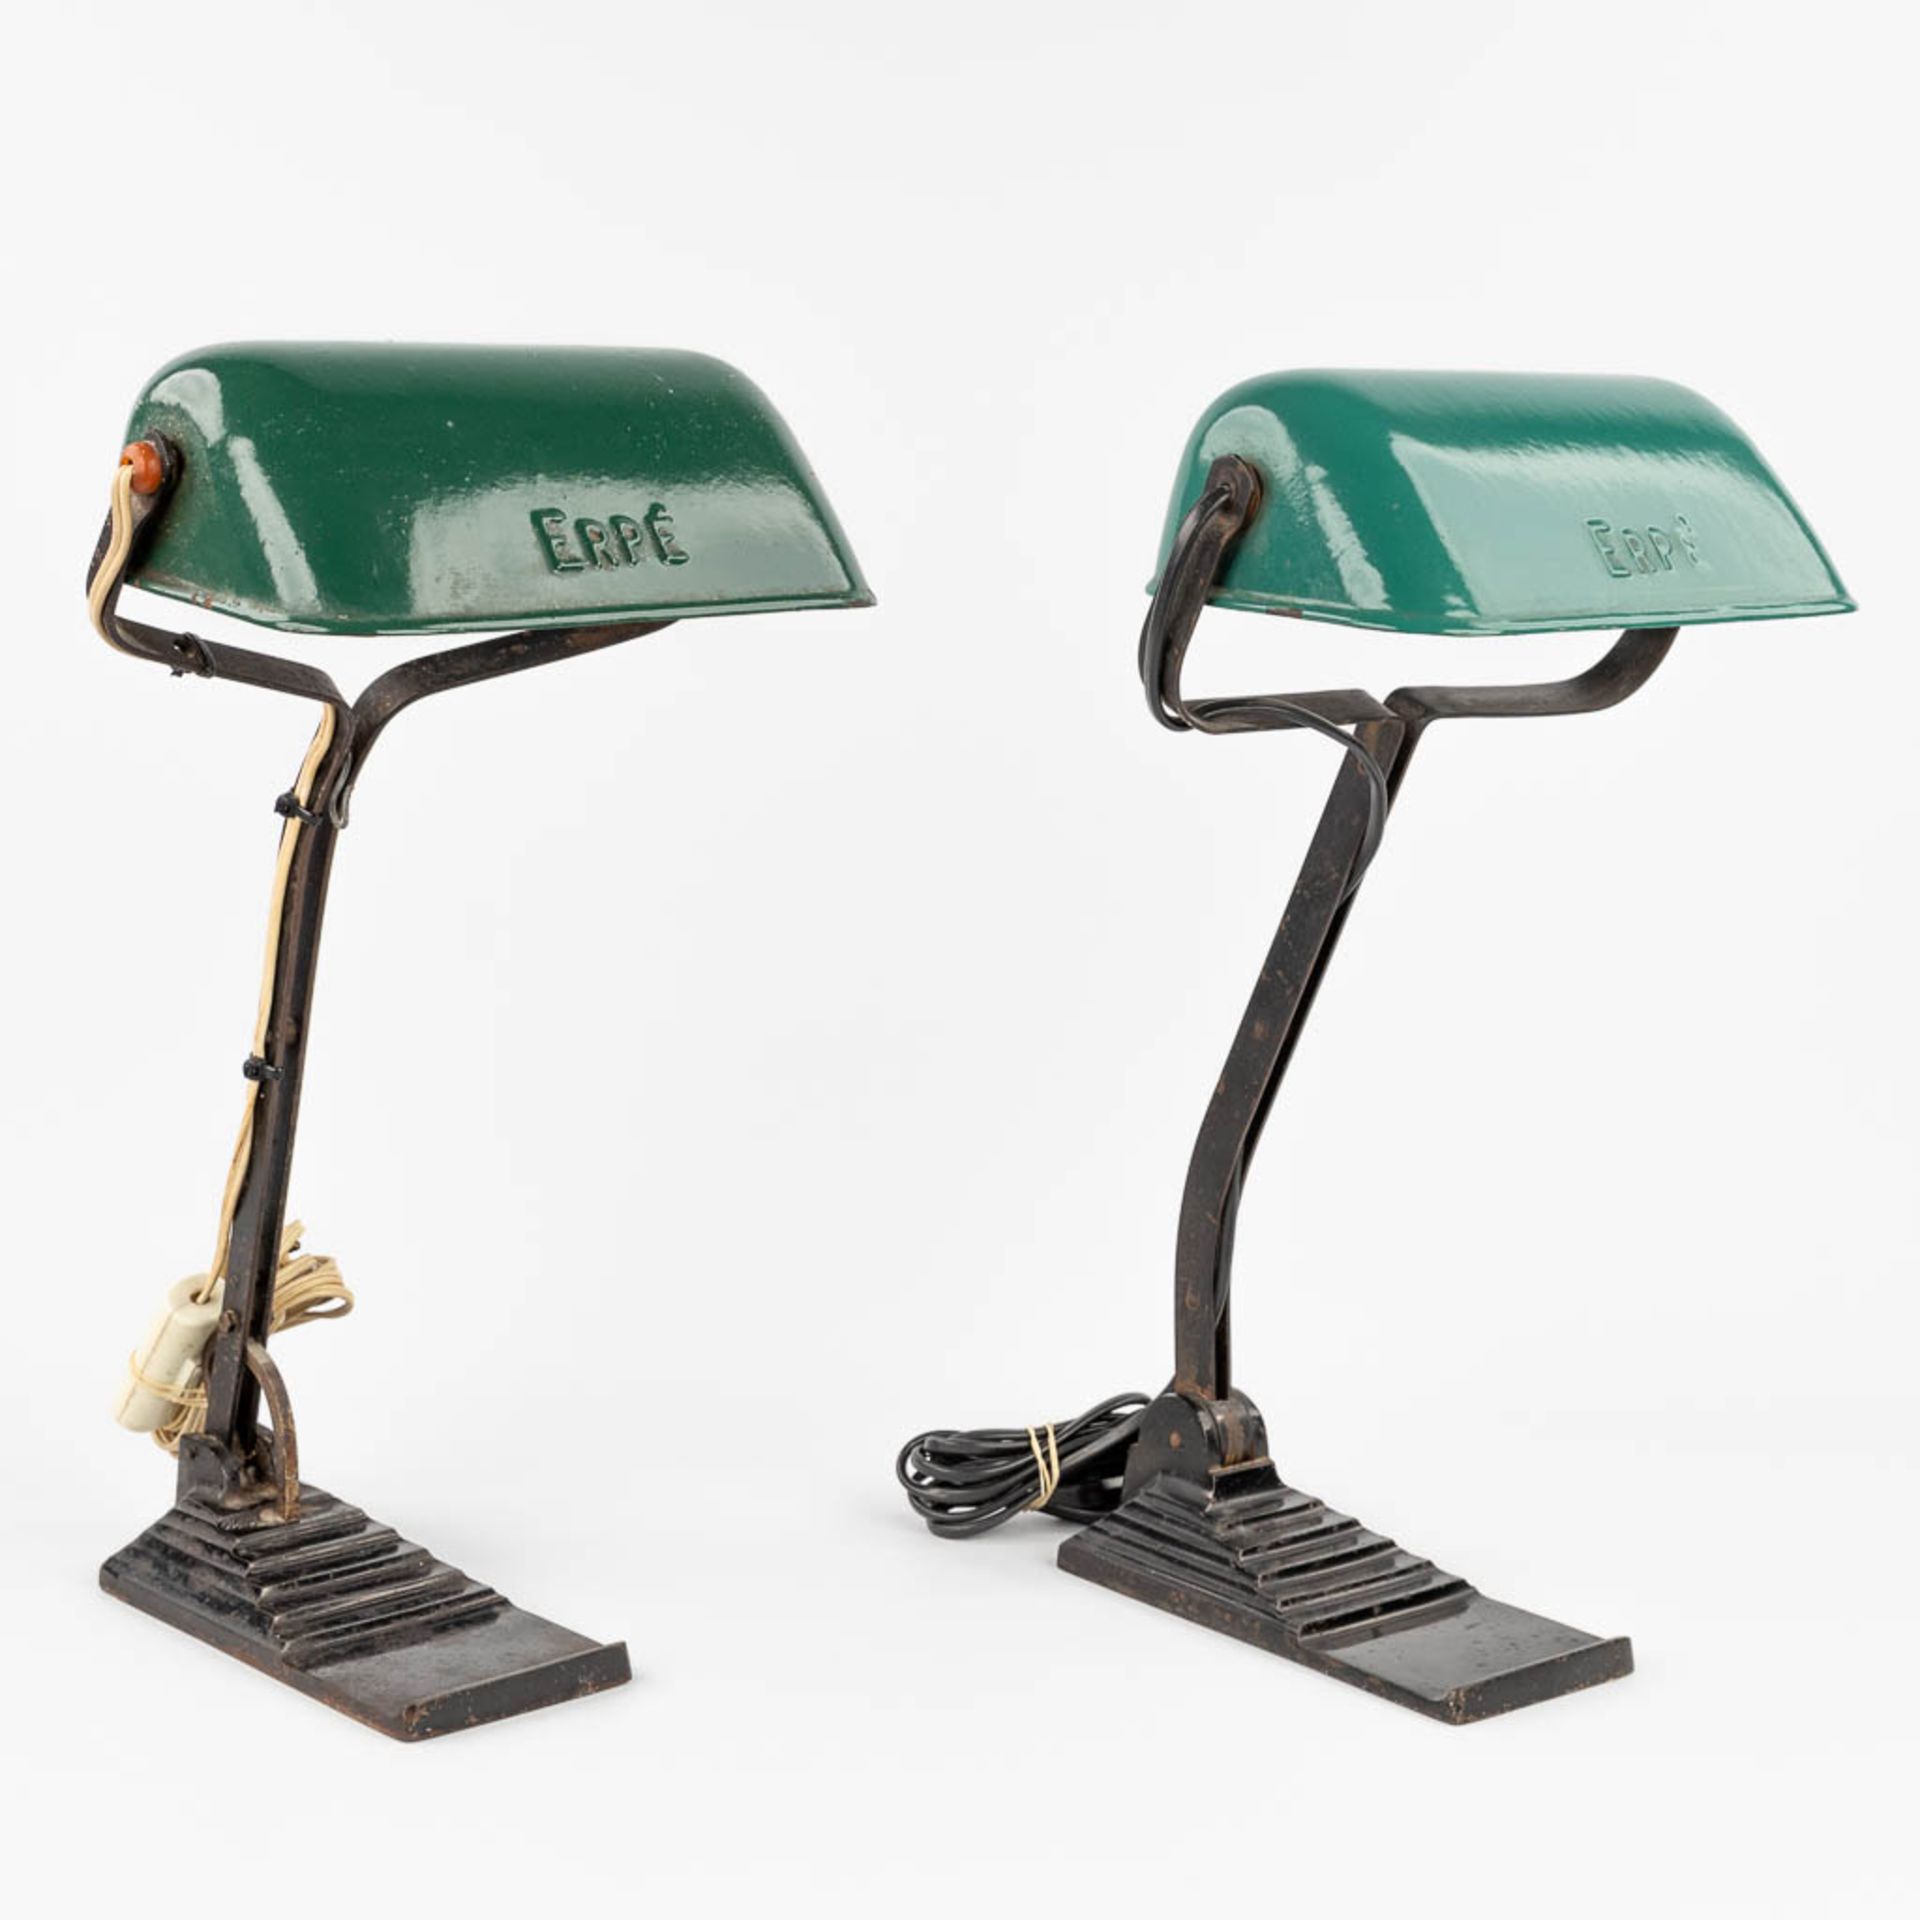 Erpe, a collection of 2 table lamps with green enamelled metal shades. (H:44 cm) - Image 4 of 17